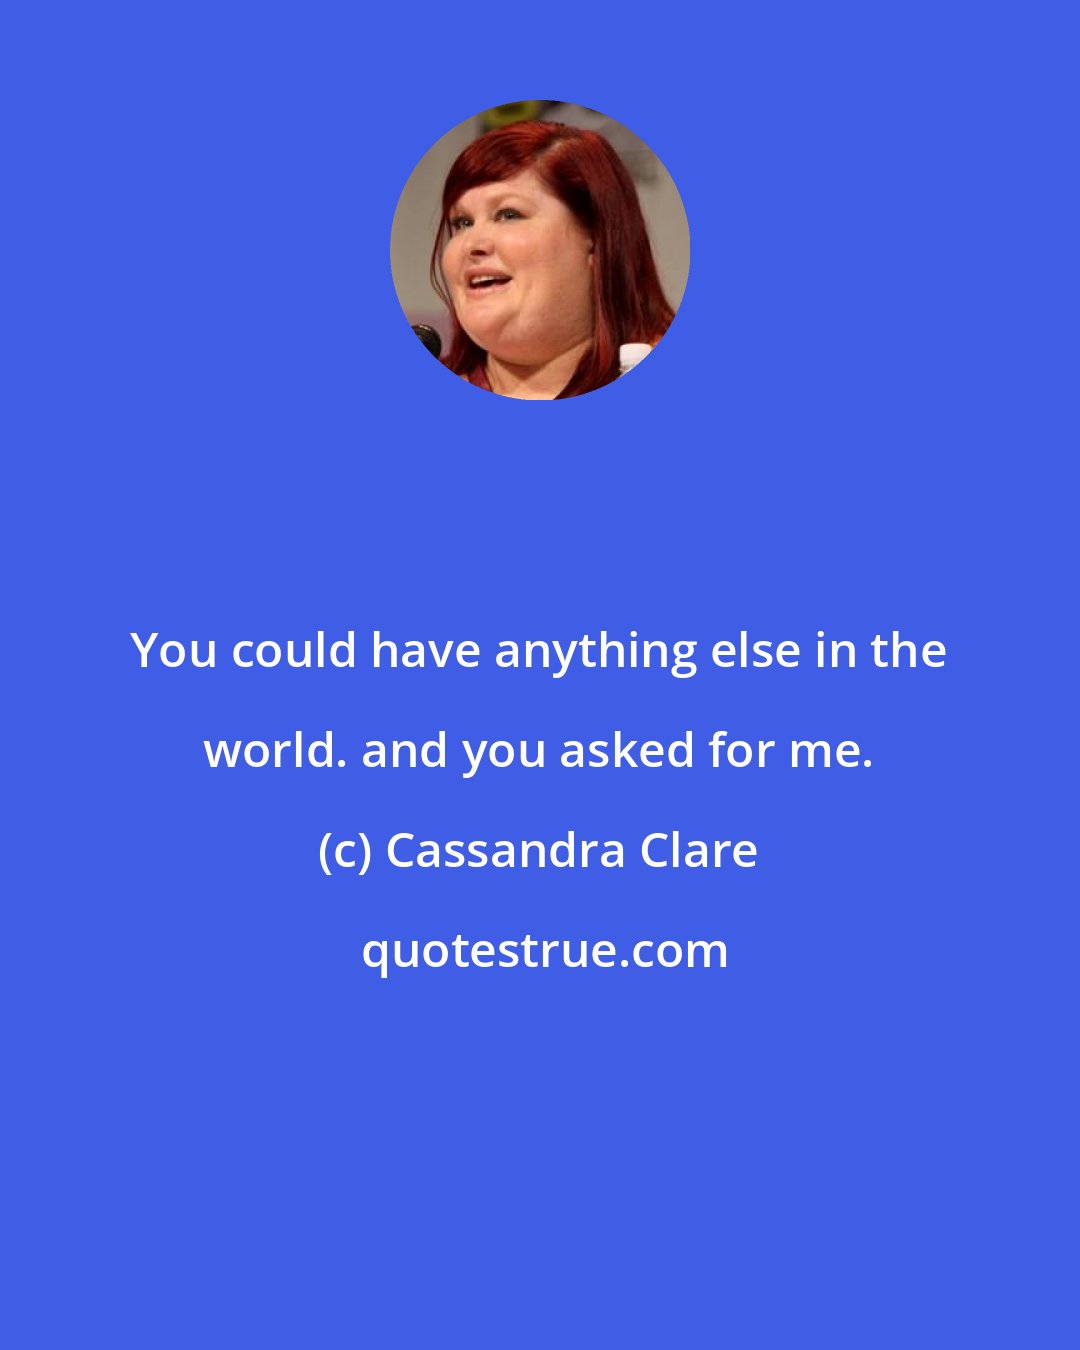 Cassandra Clare: You could have anything else in the world. and you asked for me.